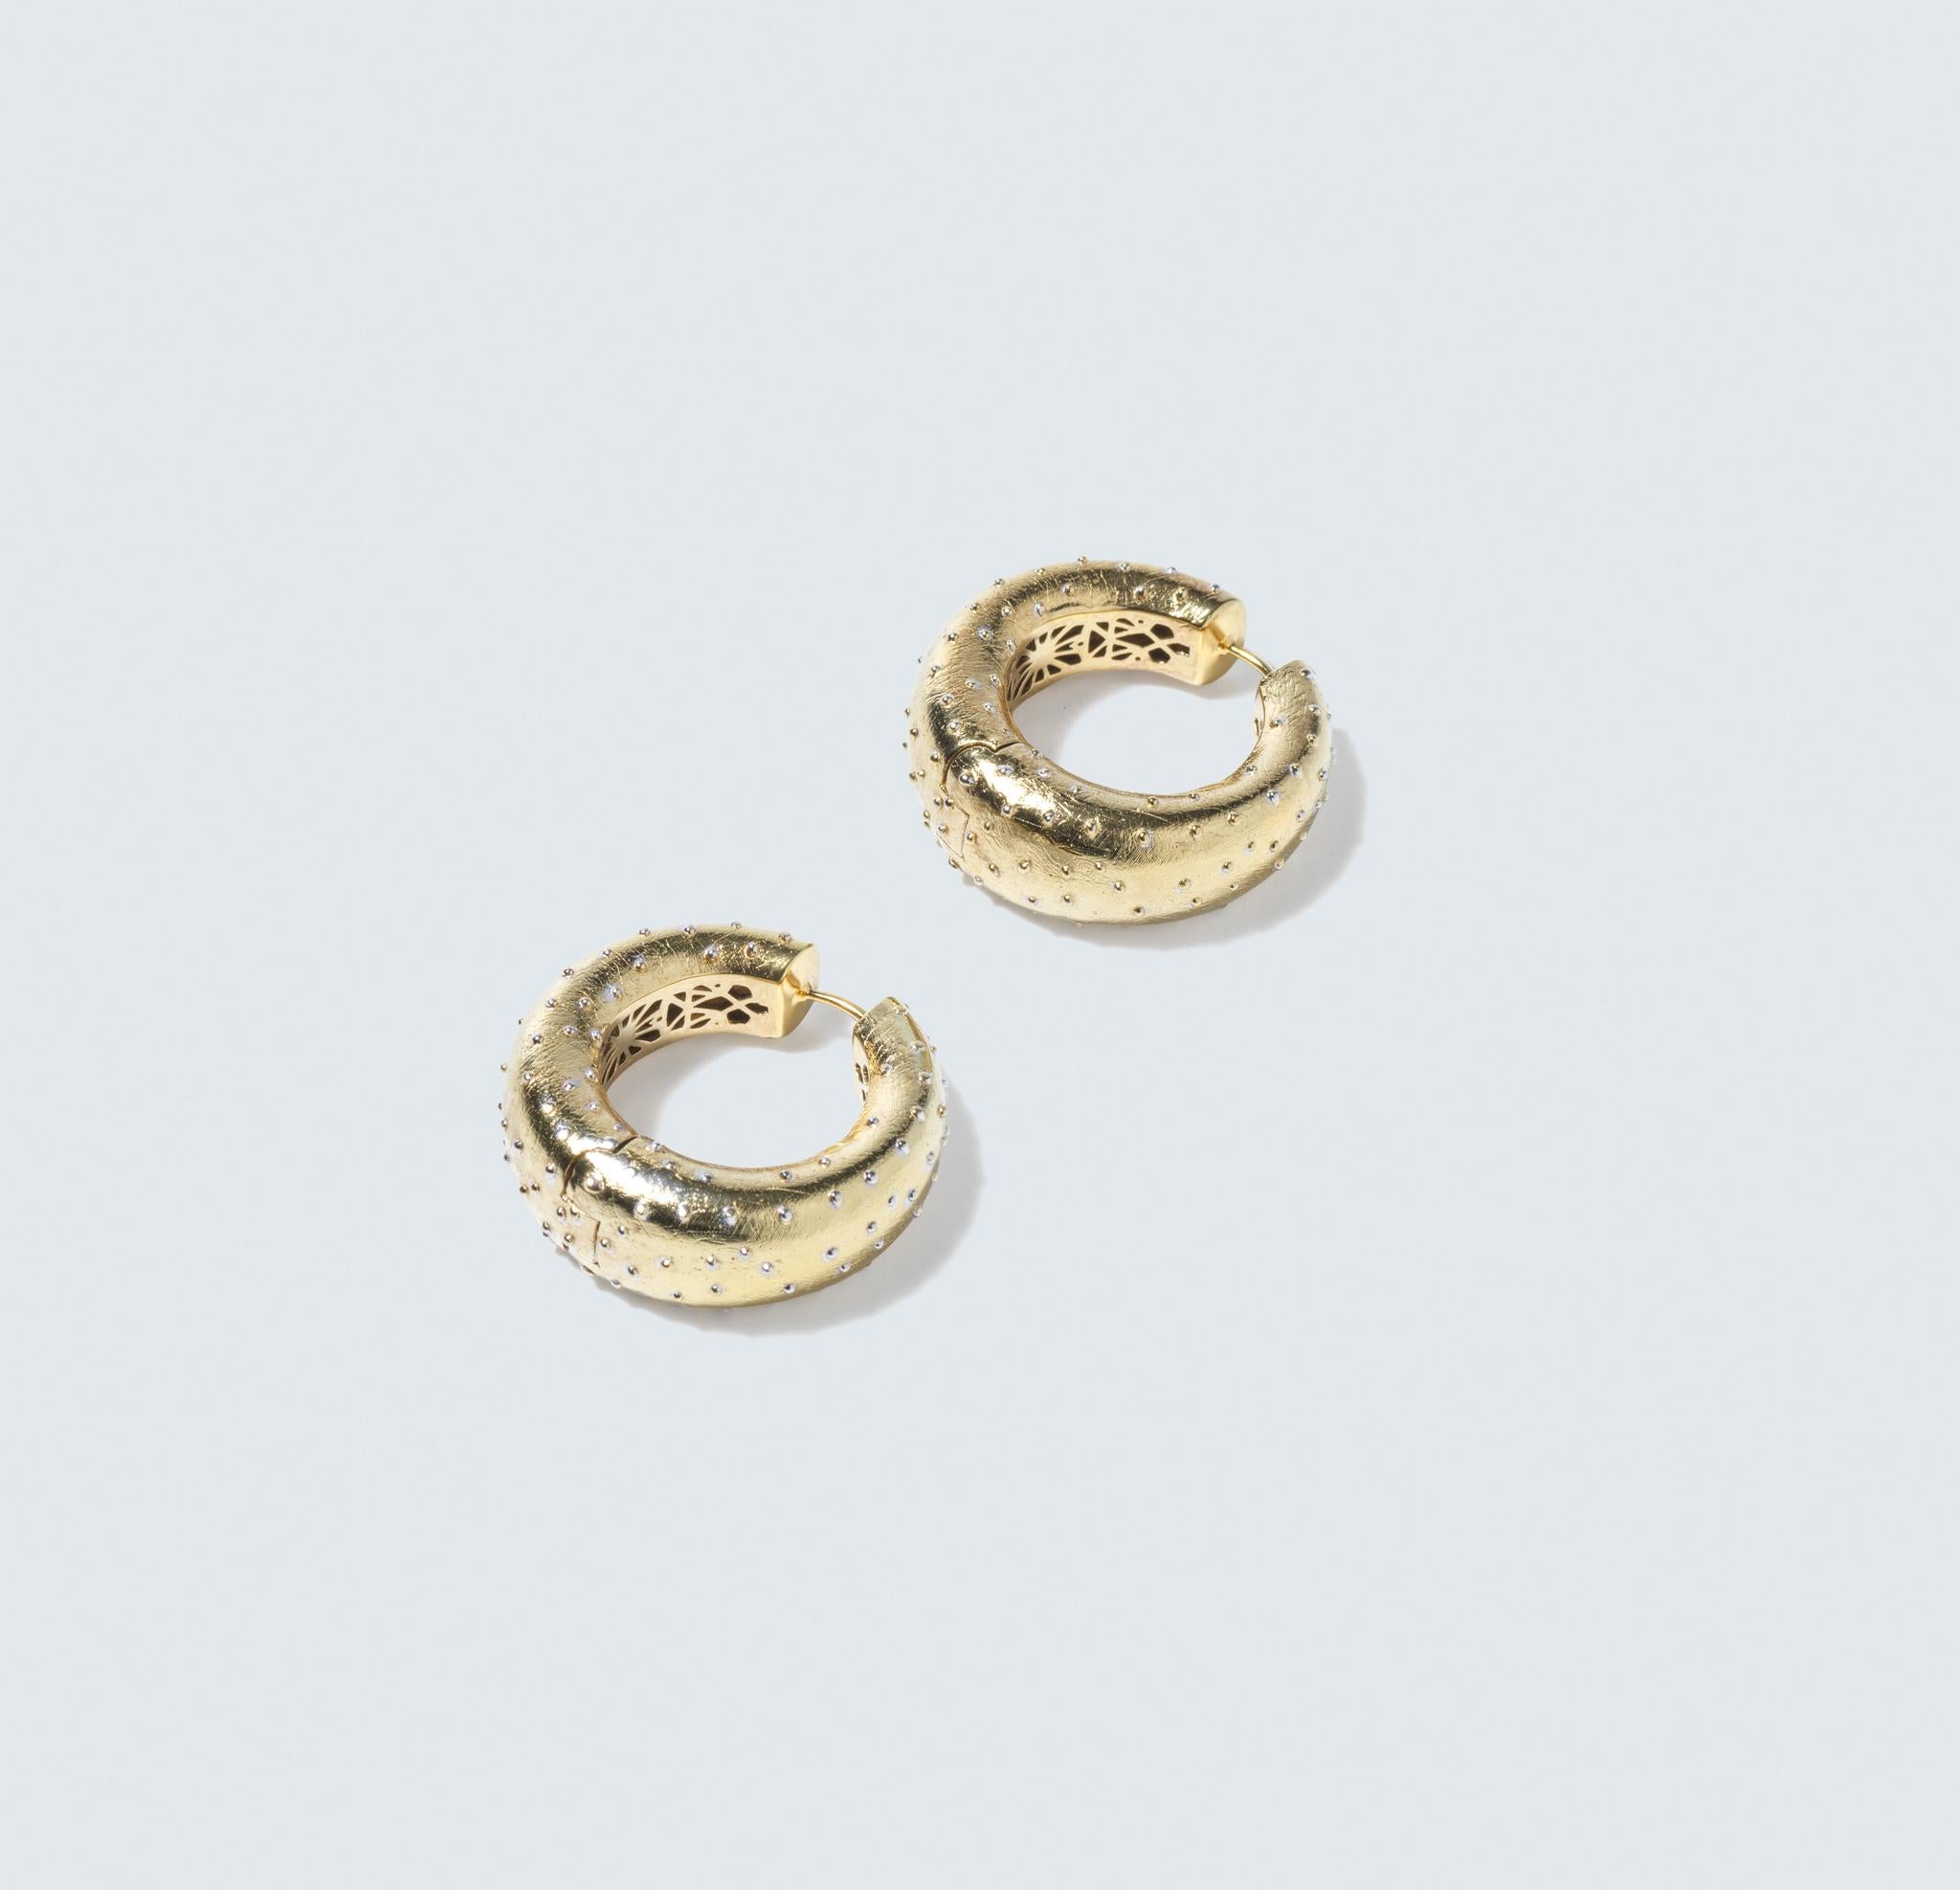 Introducing the mesmerizing gilded sterling silver Hoop Earrings from the 